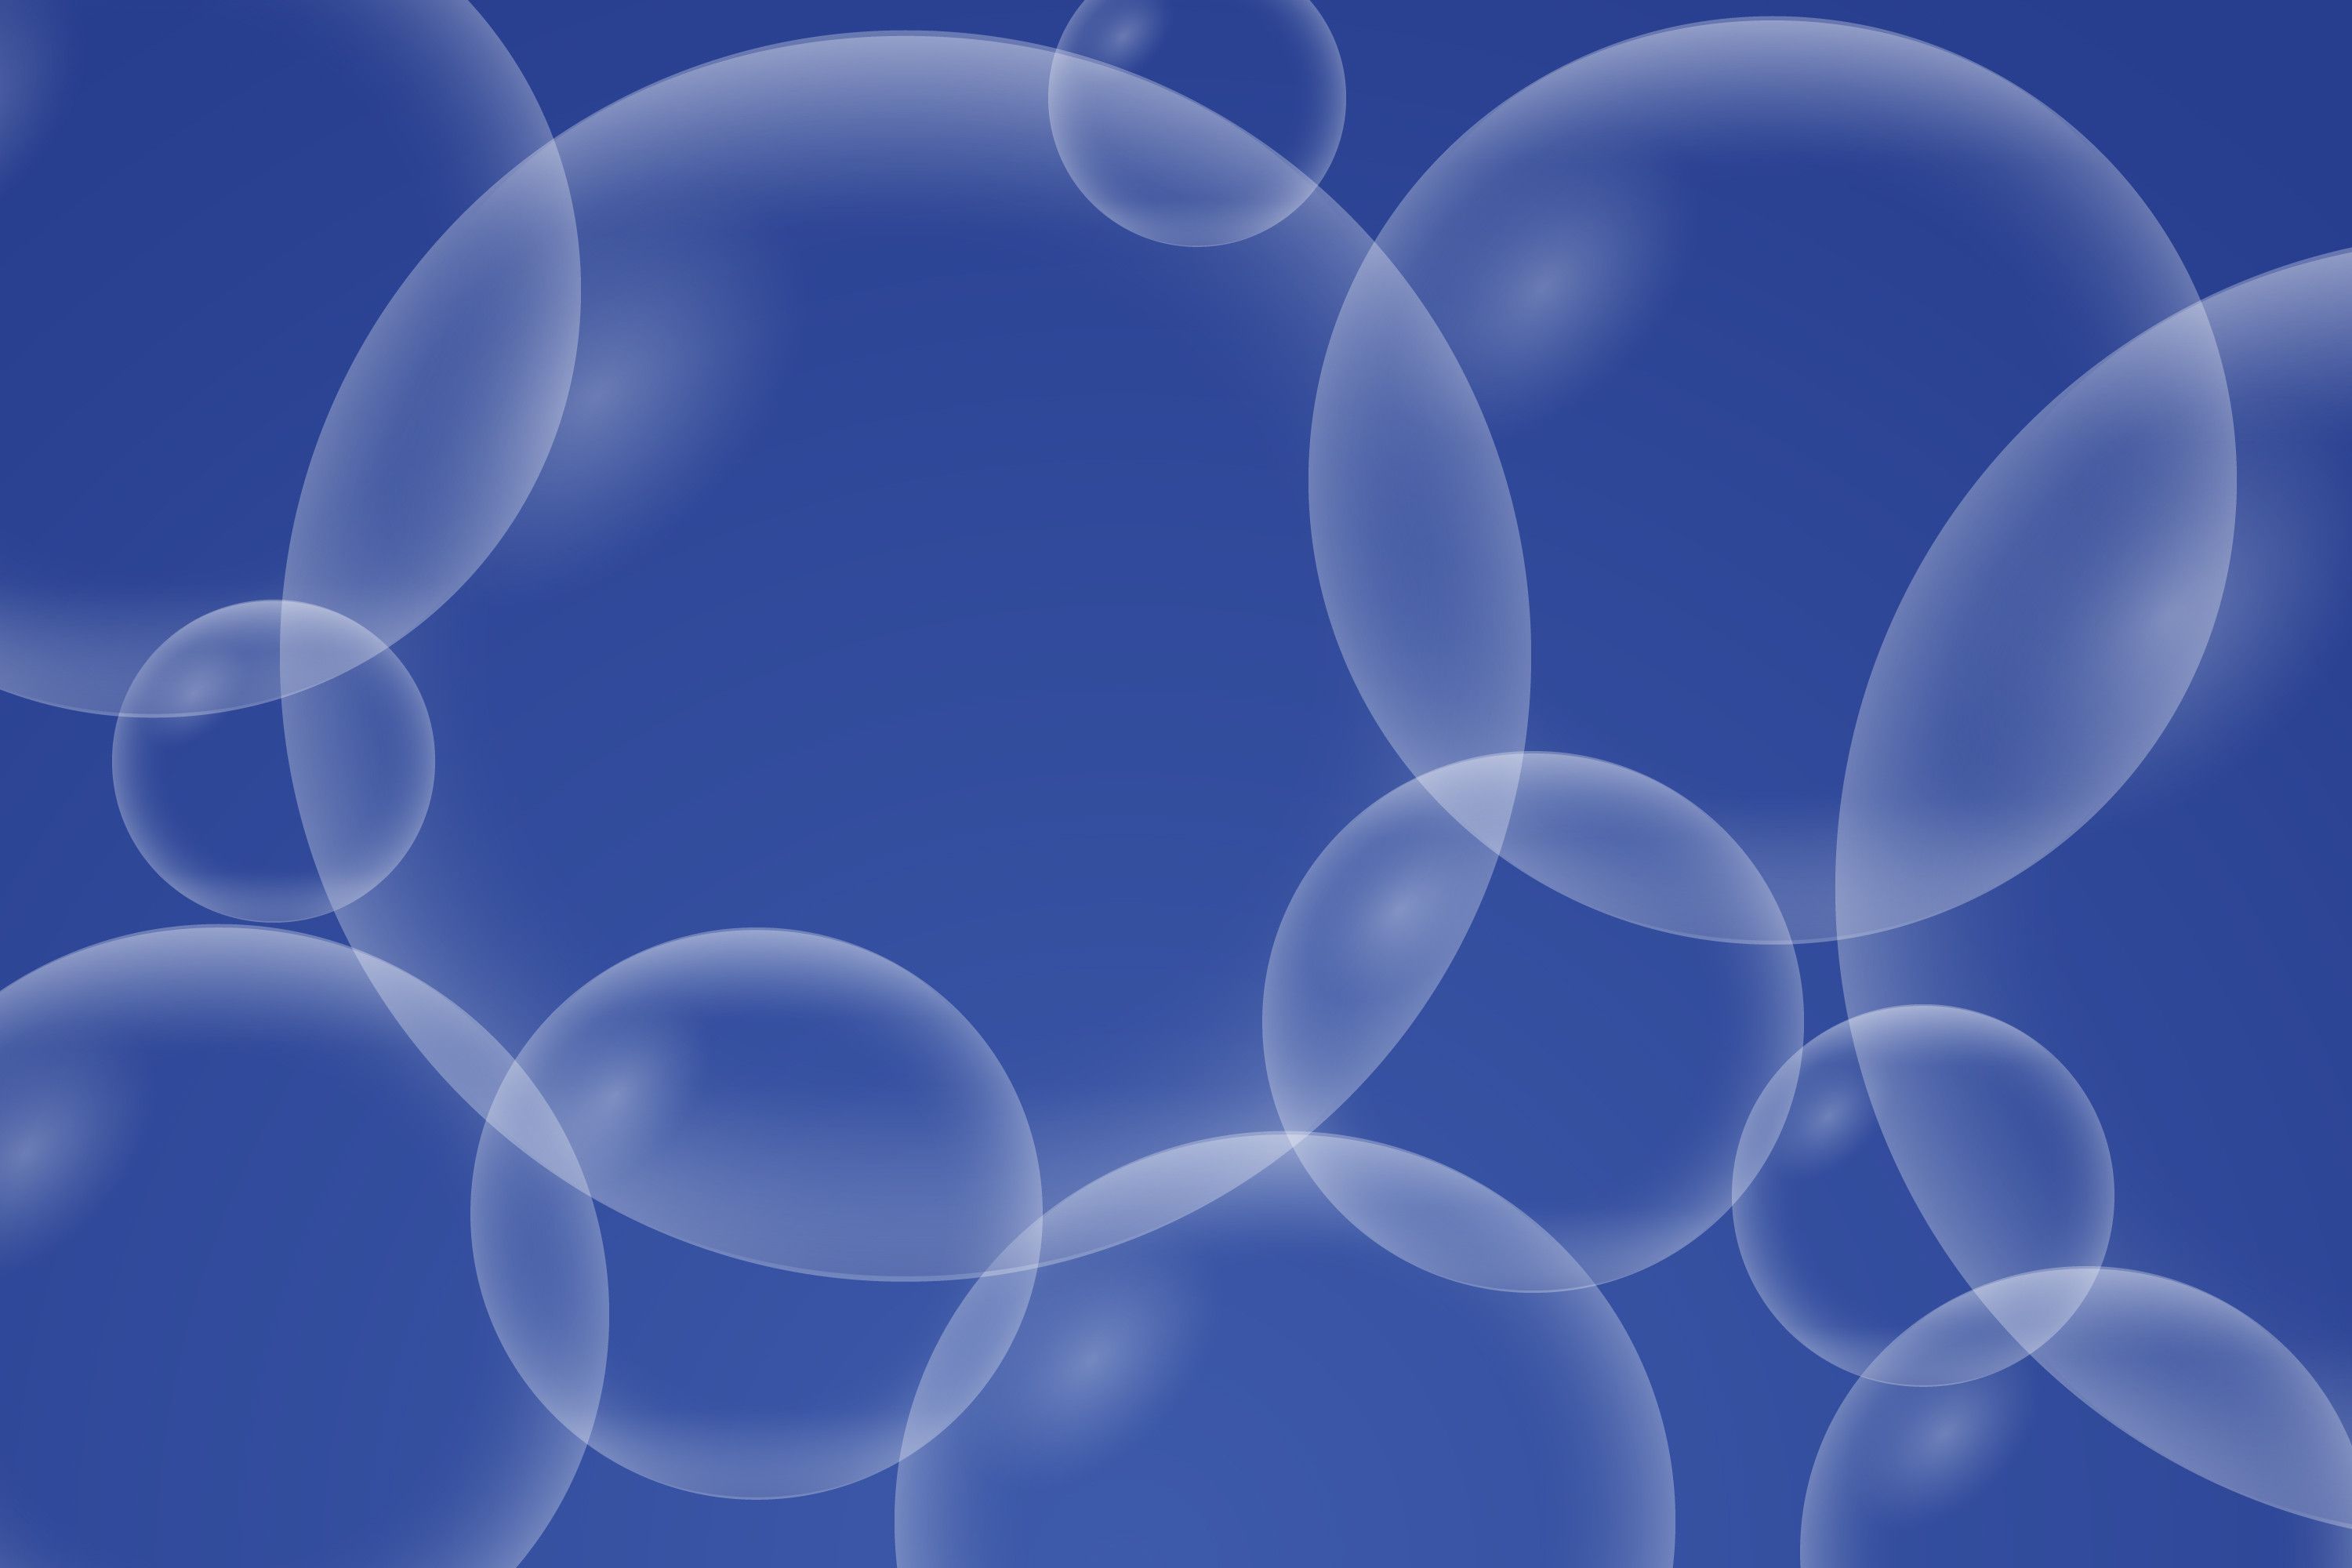 Abstract Bubbles on a Blue Background Graphic by CLton Studio Graphic · Creative Fabrica